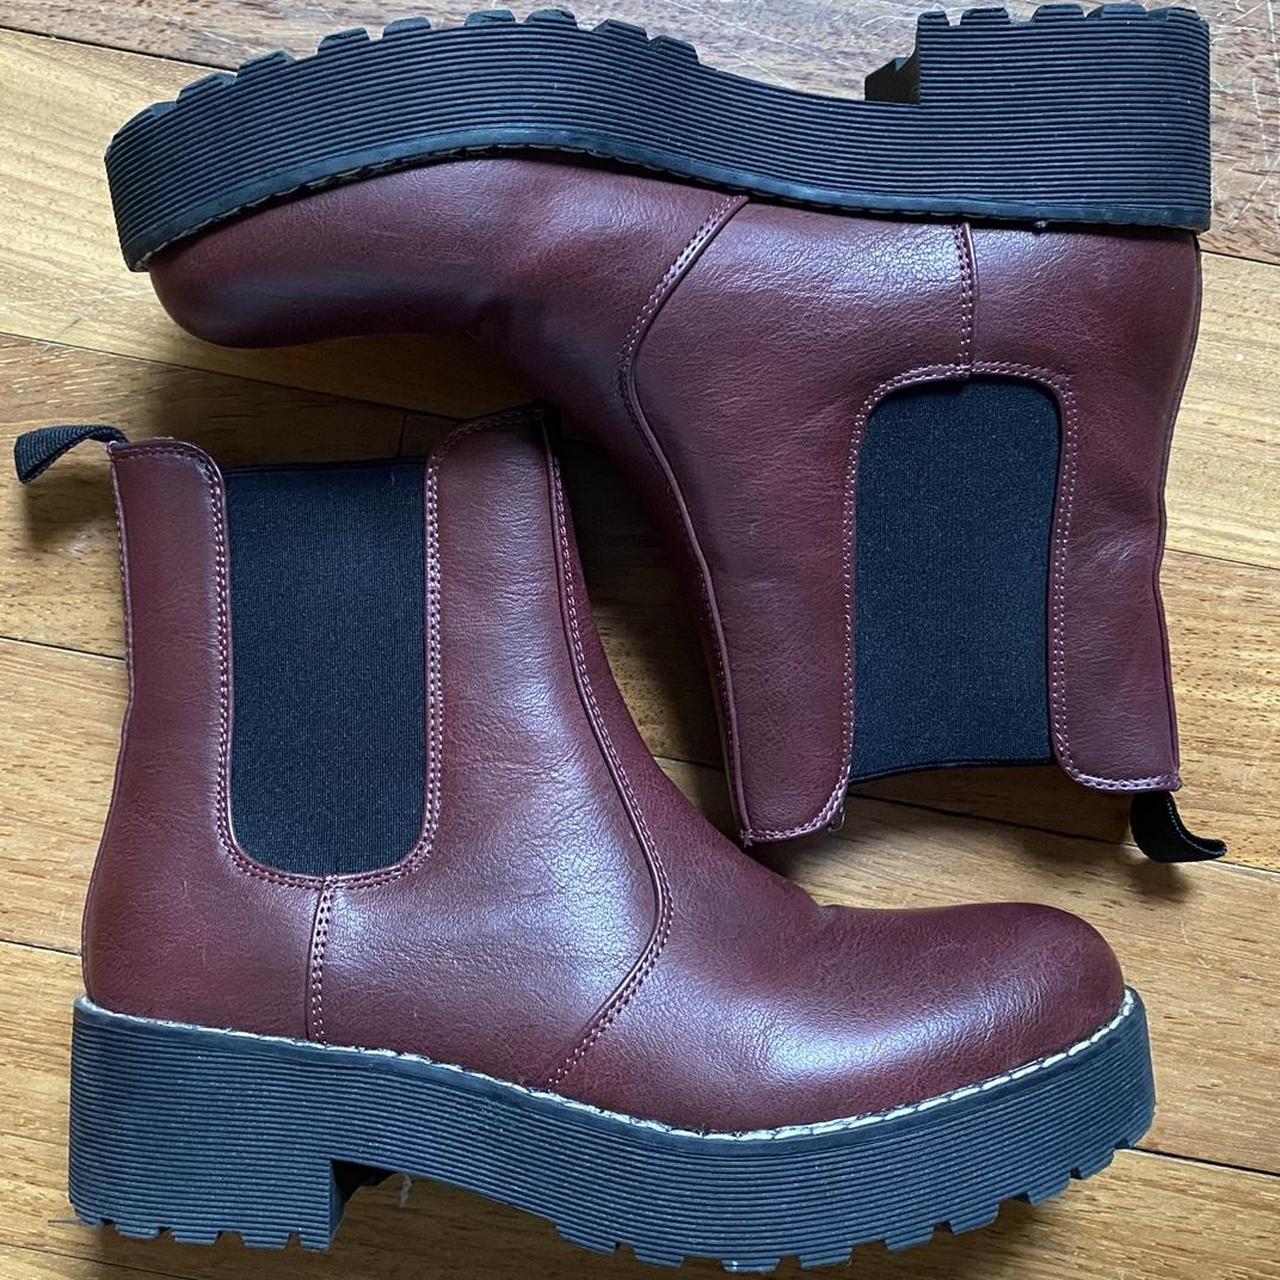 Dirty Laundry Women's Burgundy and Red Boots (2)